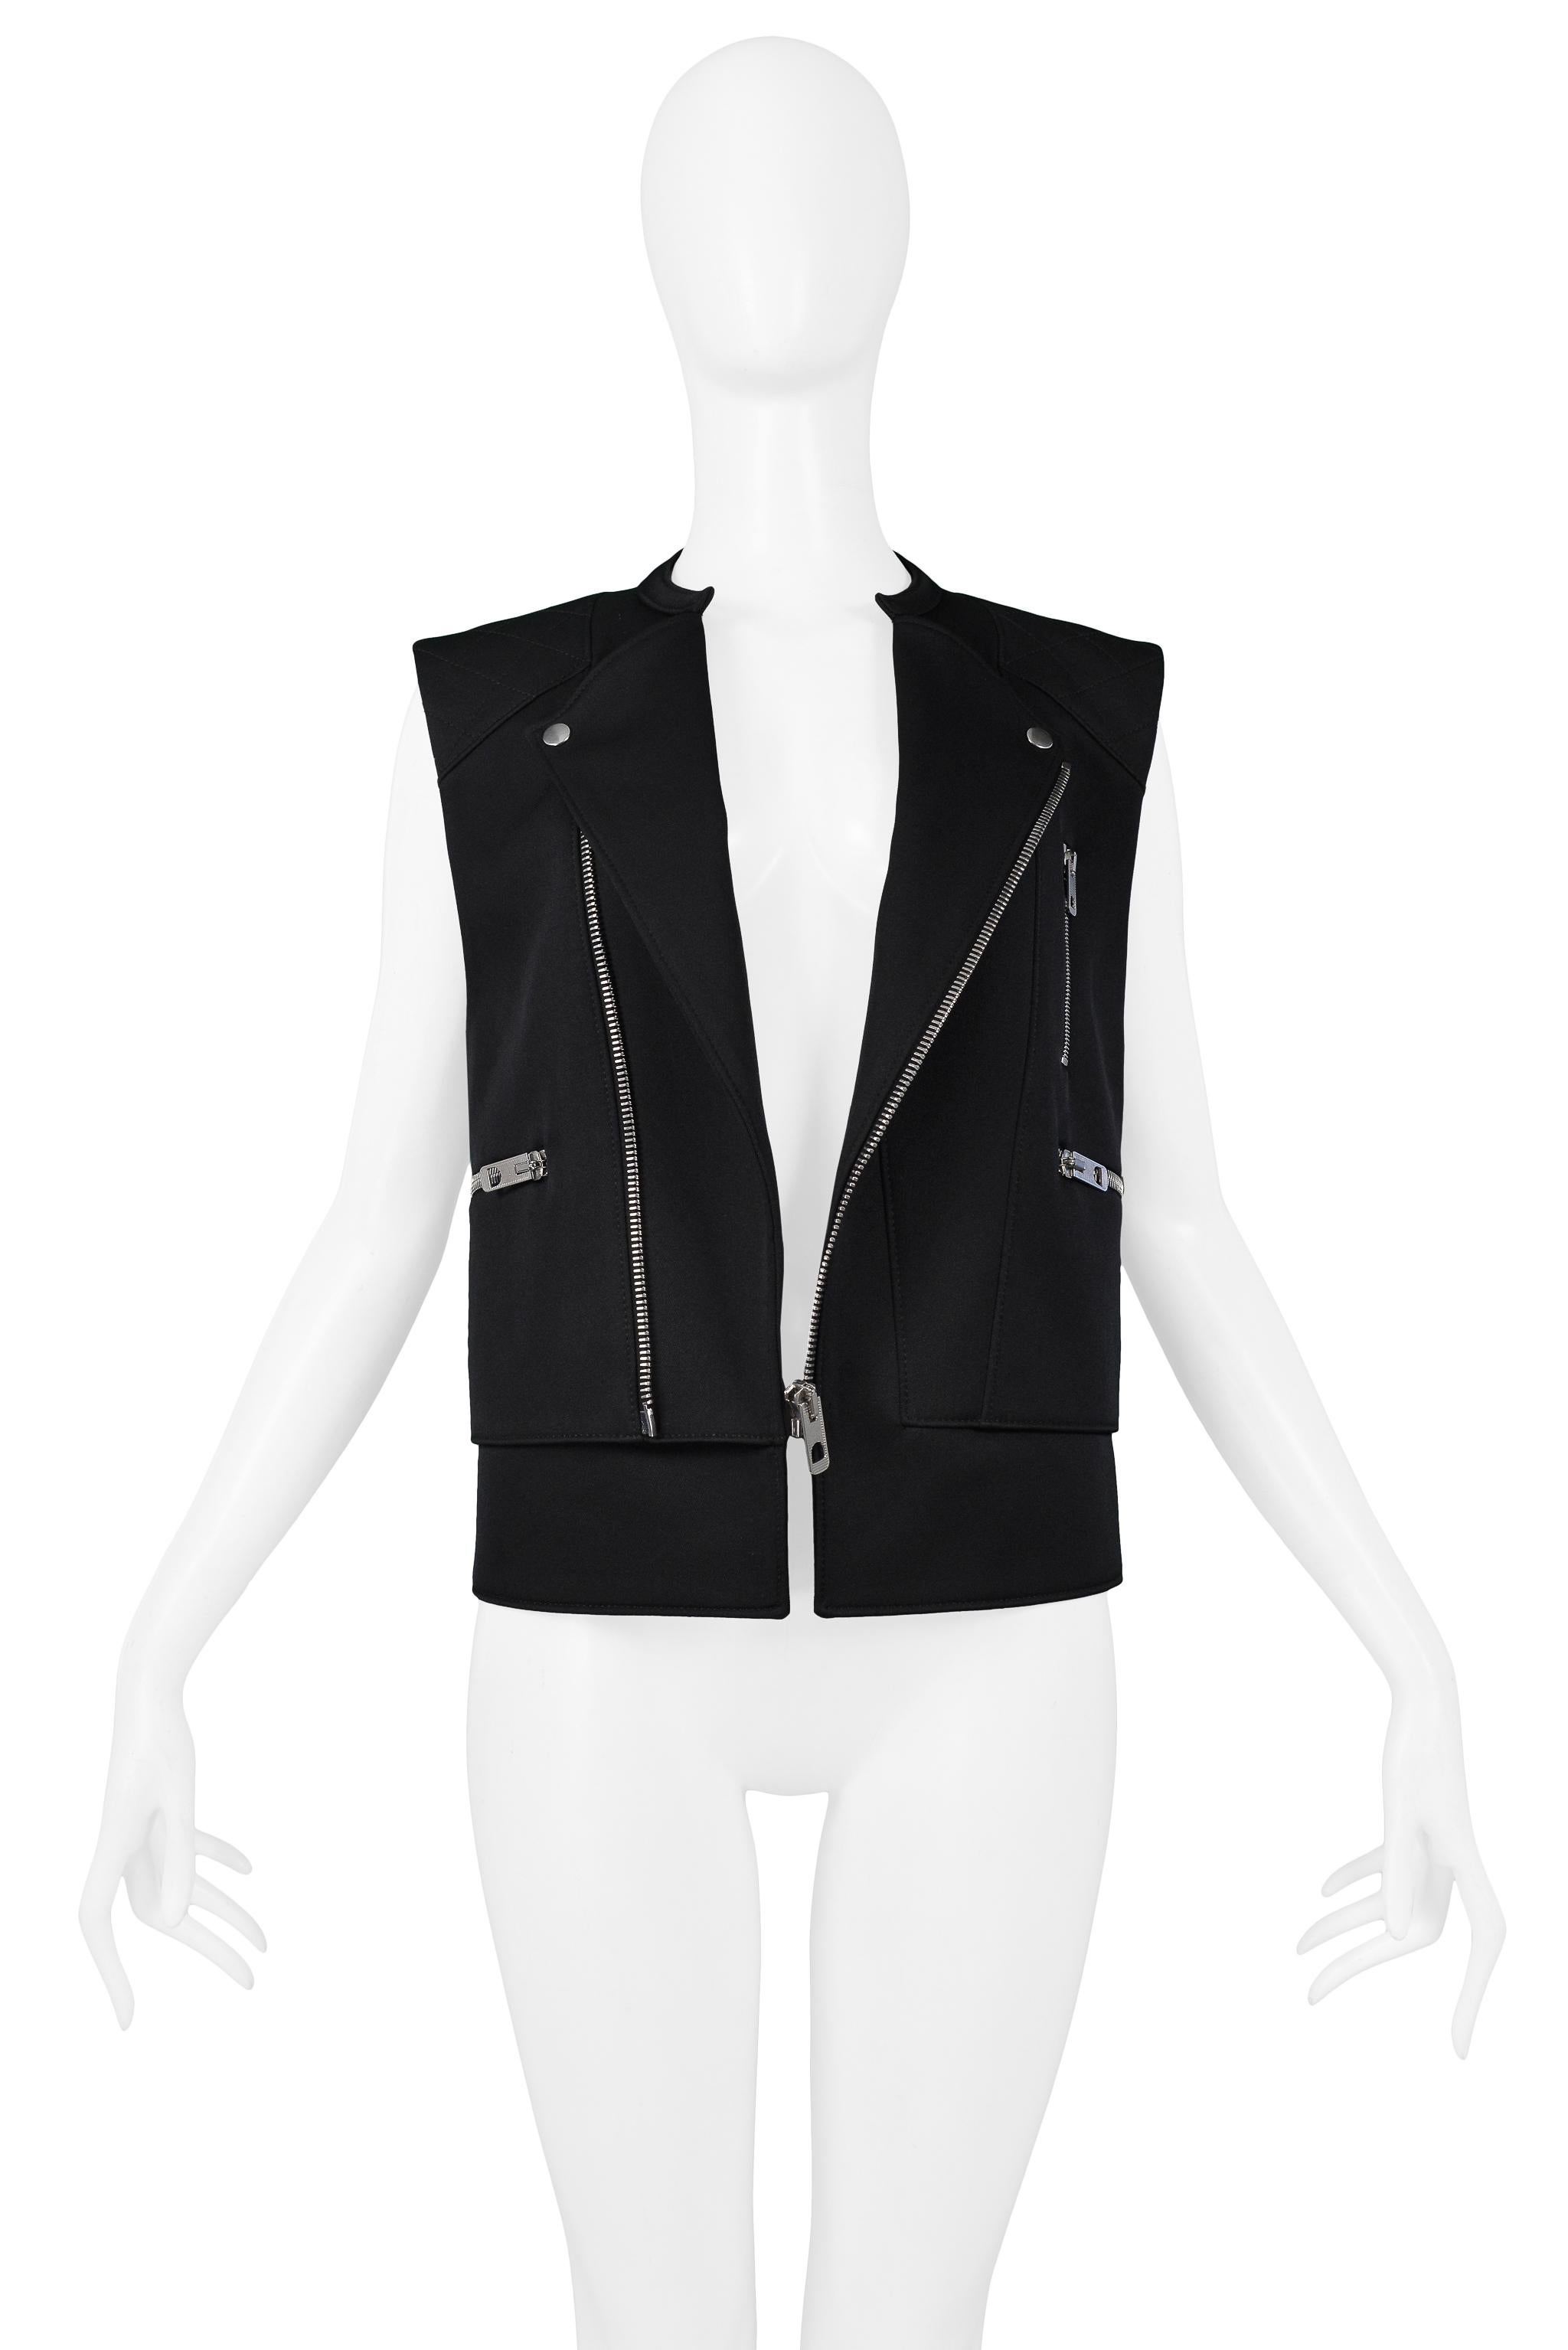 Resurrection Vintage is excited to offer a vintage Balenciaga by Nicolas Ghesquière black moto vest featuring silver-tone hardware, an asymmetrical zipper closure, and three zipper pockets. 
Balenciaga Paris
Designed By Nicolas Ghesquiere
Size